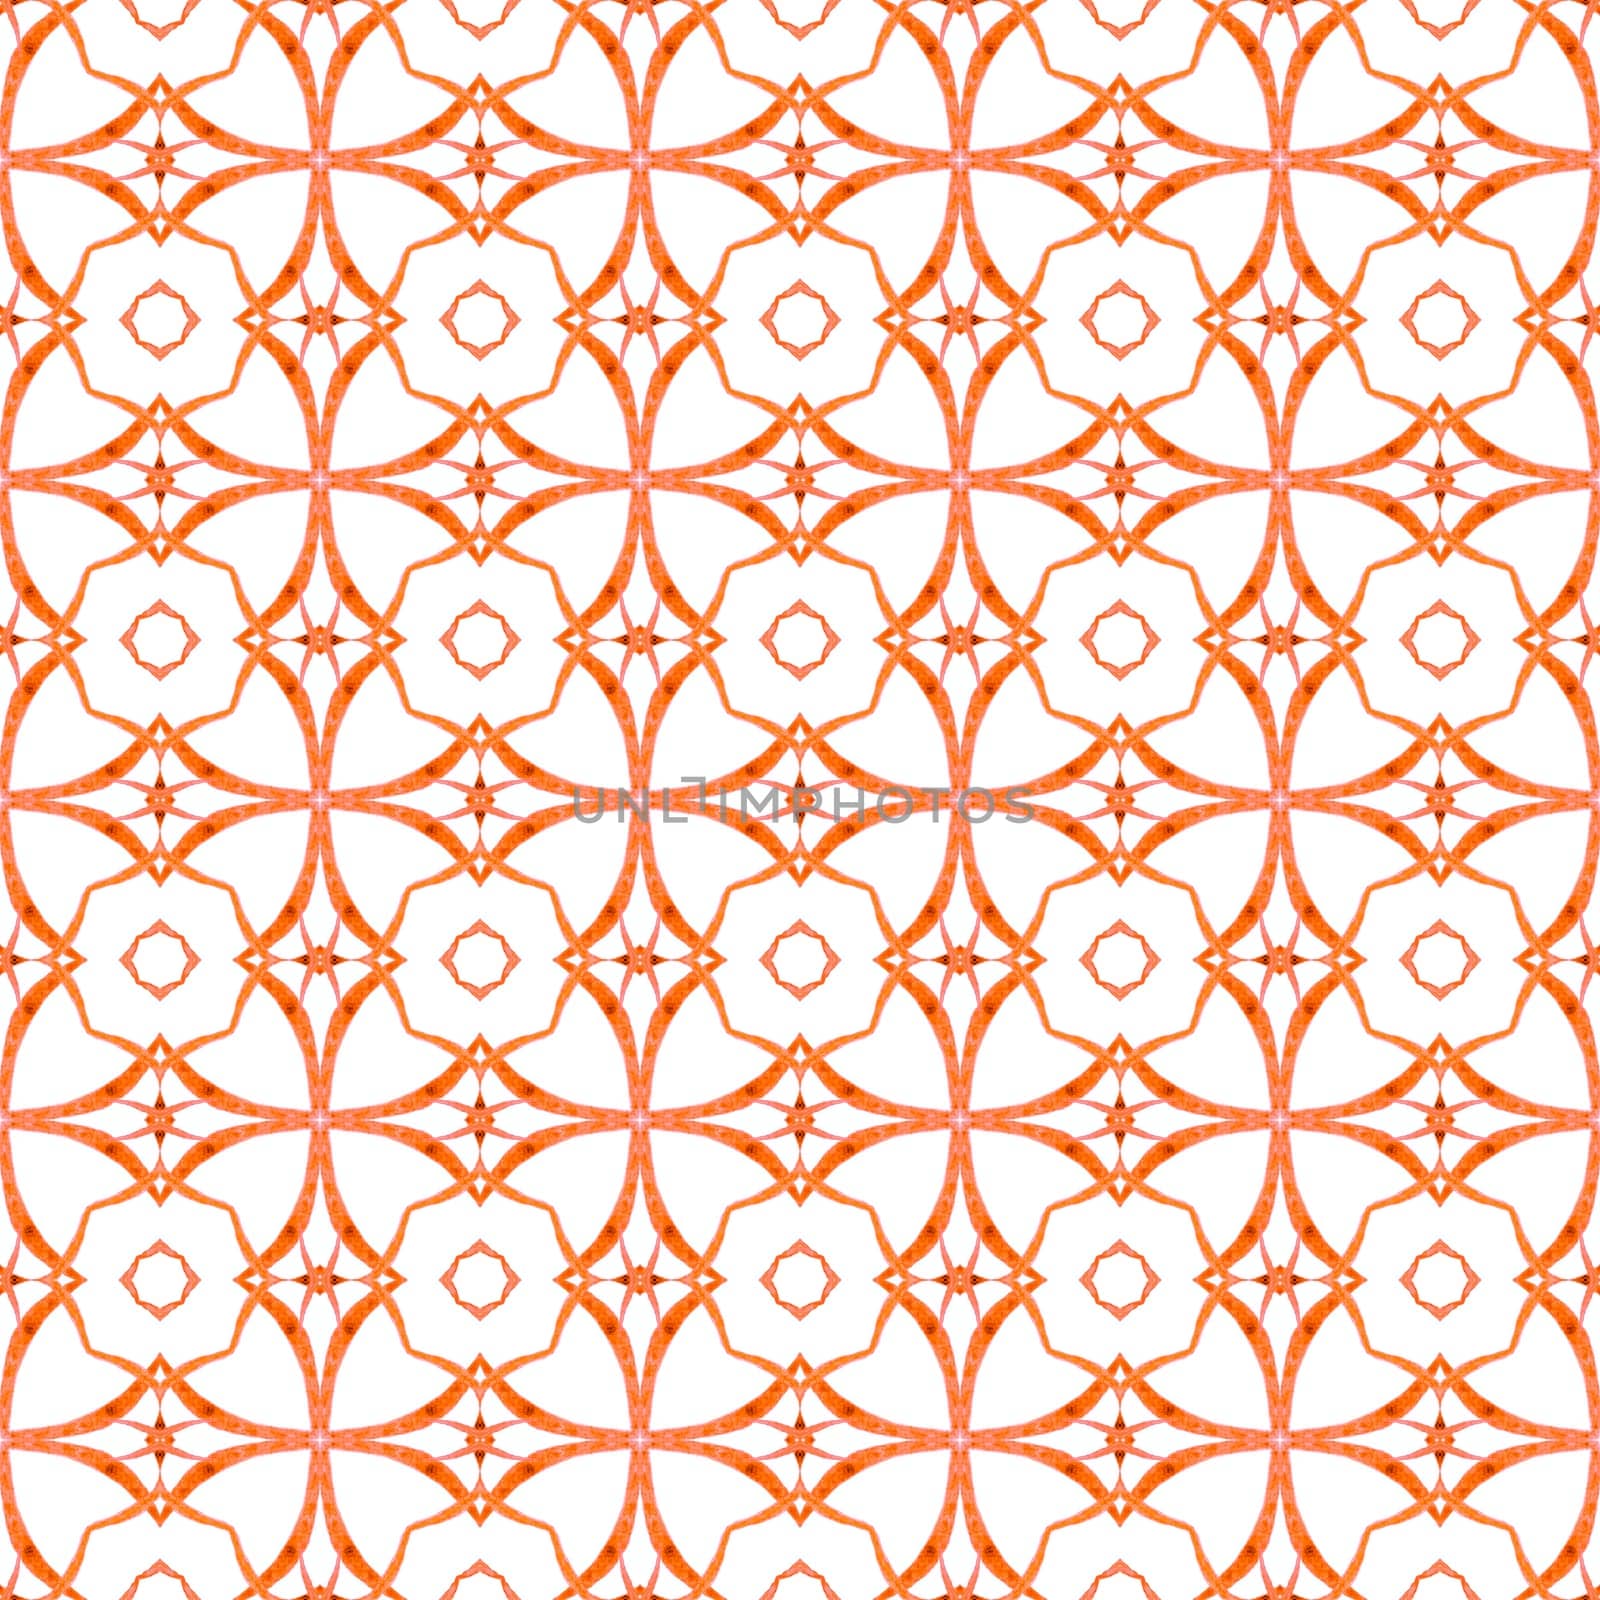 Textile ready wondrous print, swimwear fabric, wallpaper, wrapping. Orange incredible boho chic summer design. Tiled watercolor background. Hand painted tiled watercolor border.